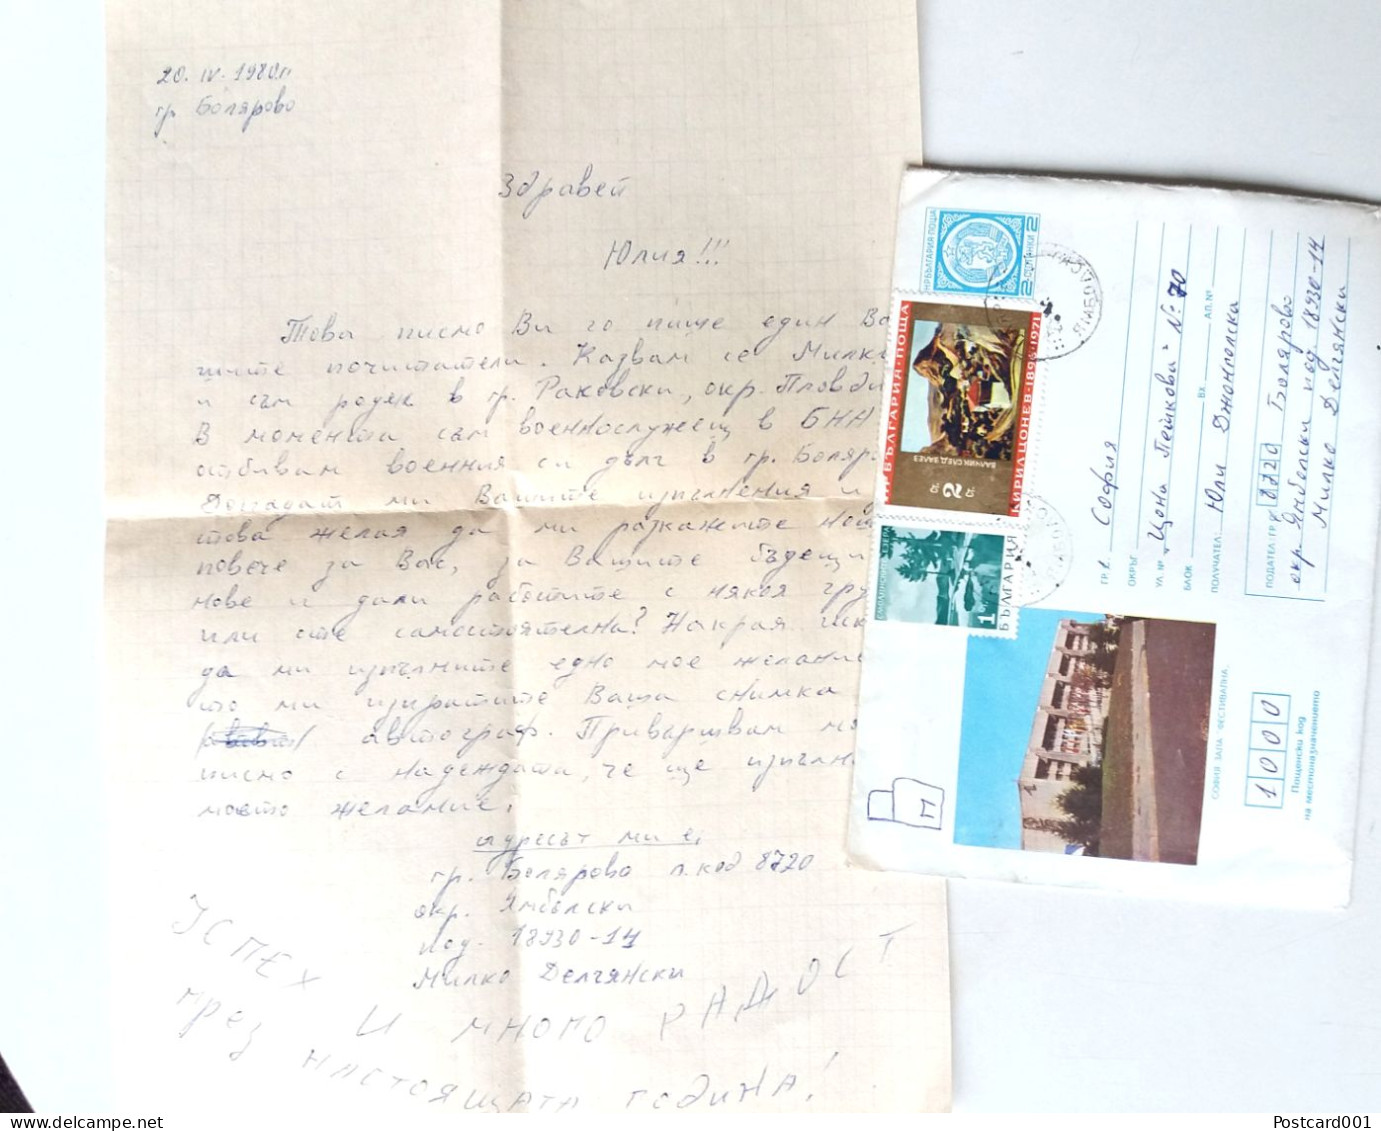 #85 Traveled Envelope Russian-Turkish War And Letter Cirillic Manuscript Bulgaria 1980 - Stamps Local Mail - Storia Postale